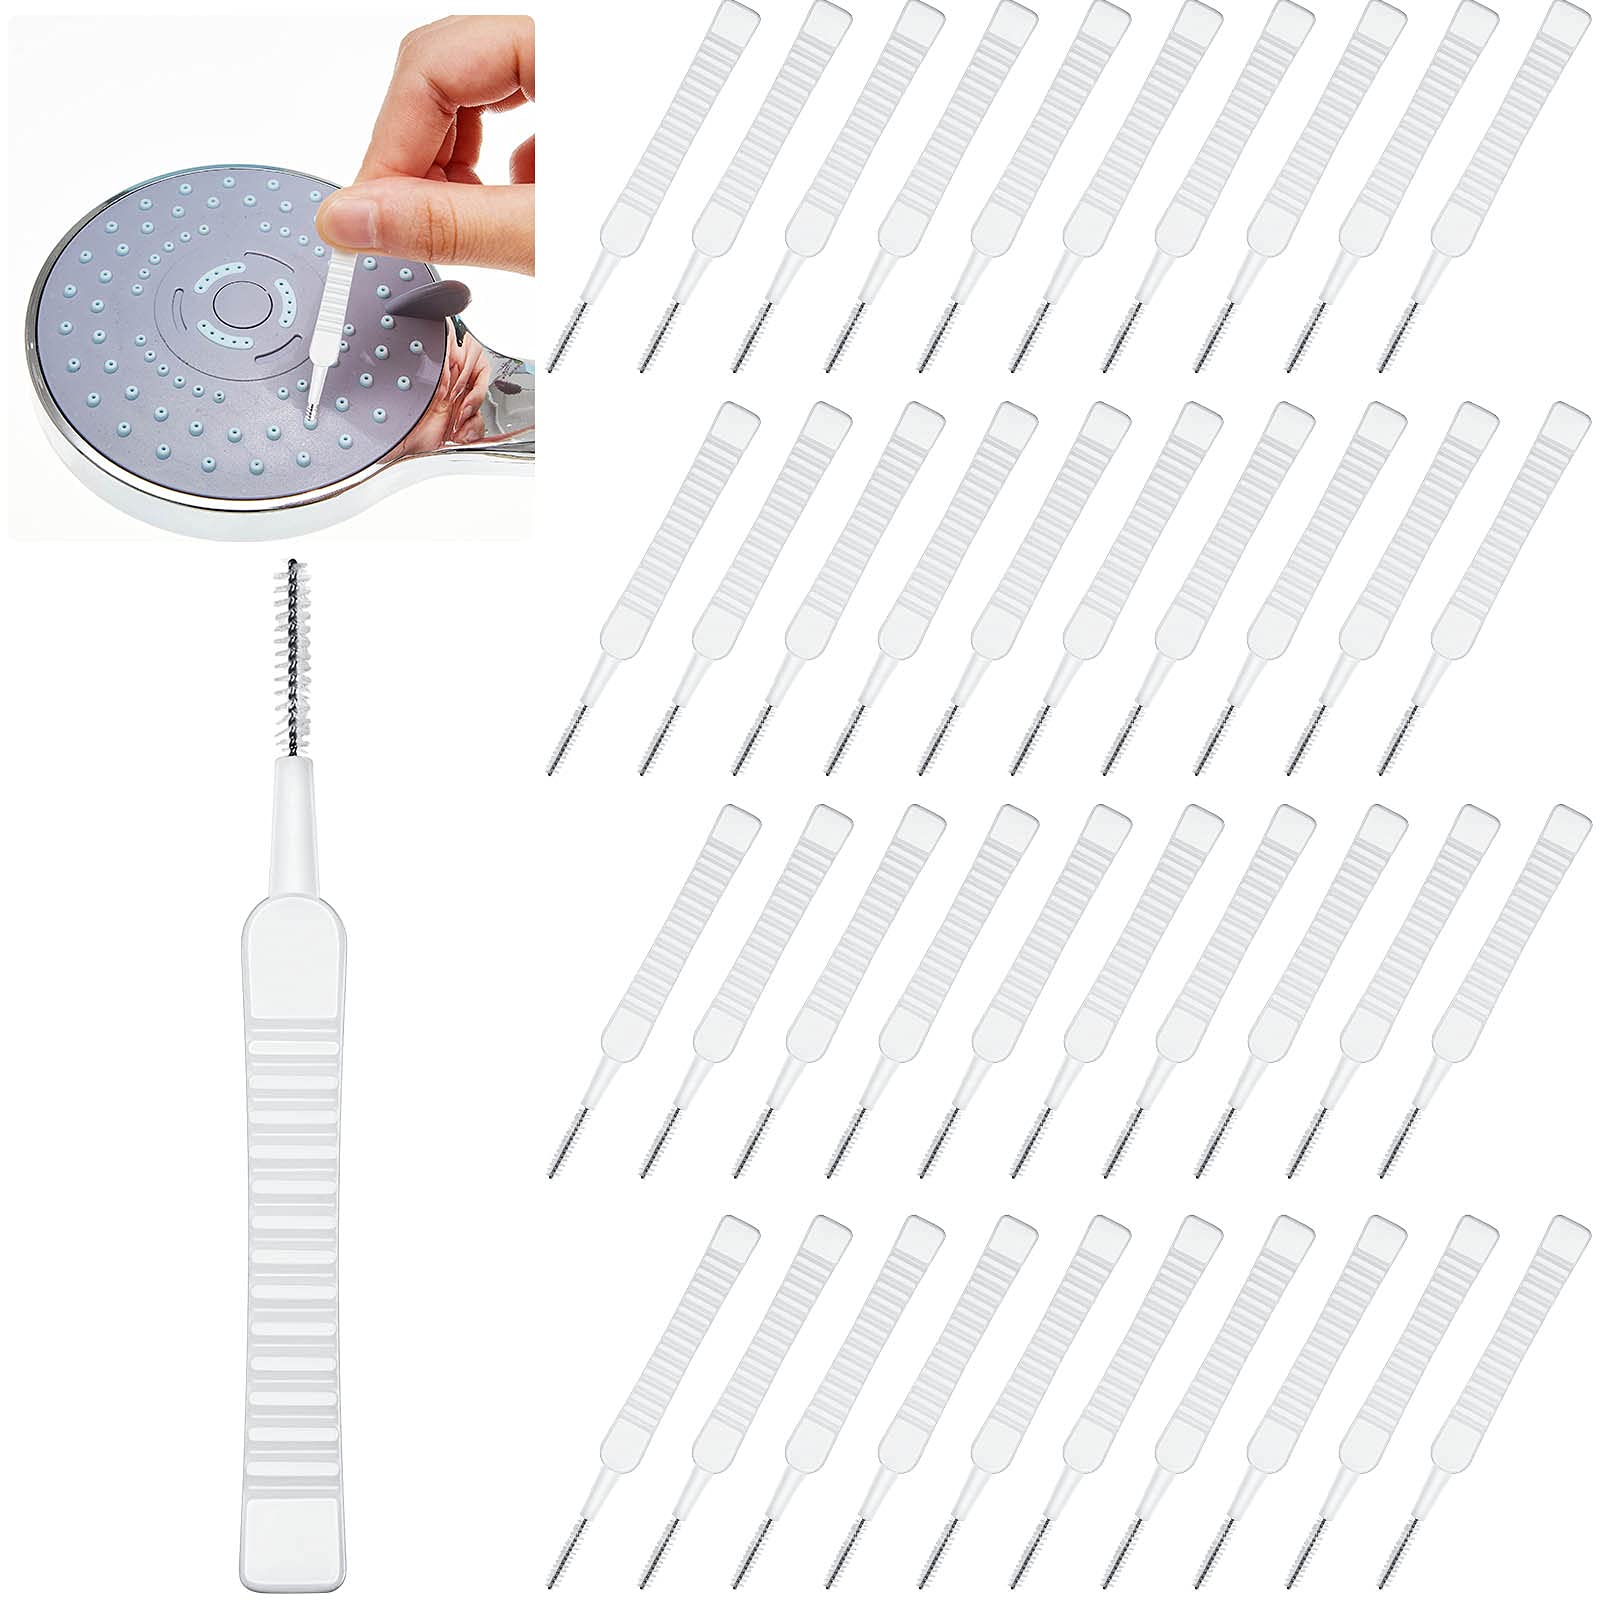 Shower Head Cleaner Brush - Anti-clogging Pore Cleaner Tool For